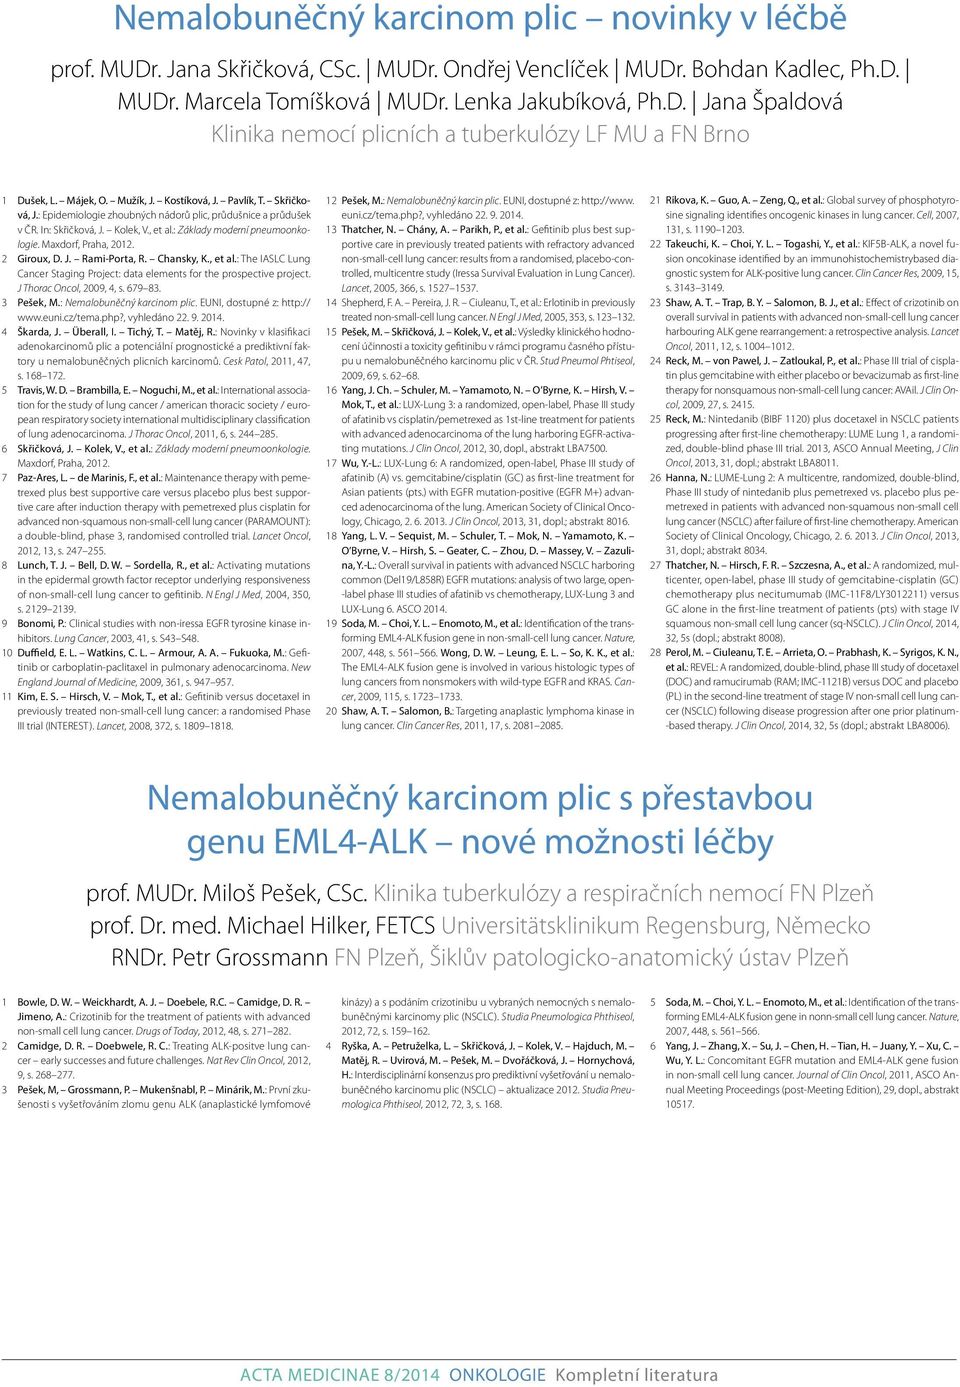 Maxdorf, Praha, 2012. 2 Giroux, D. J. Rami-Porta, R. Chansky, K., et al.: The IASLC Lung Cancer Staging Project: data elements for the prospective project. J Thorac Oncol, 2009, 4, s. 679 83.